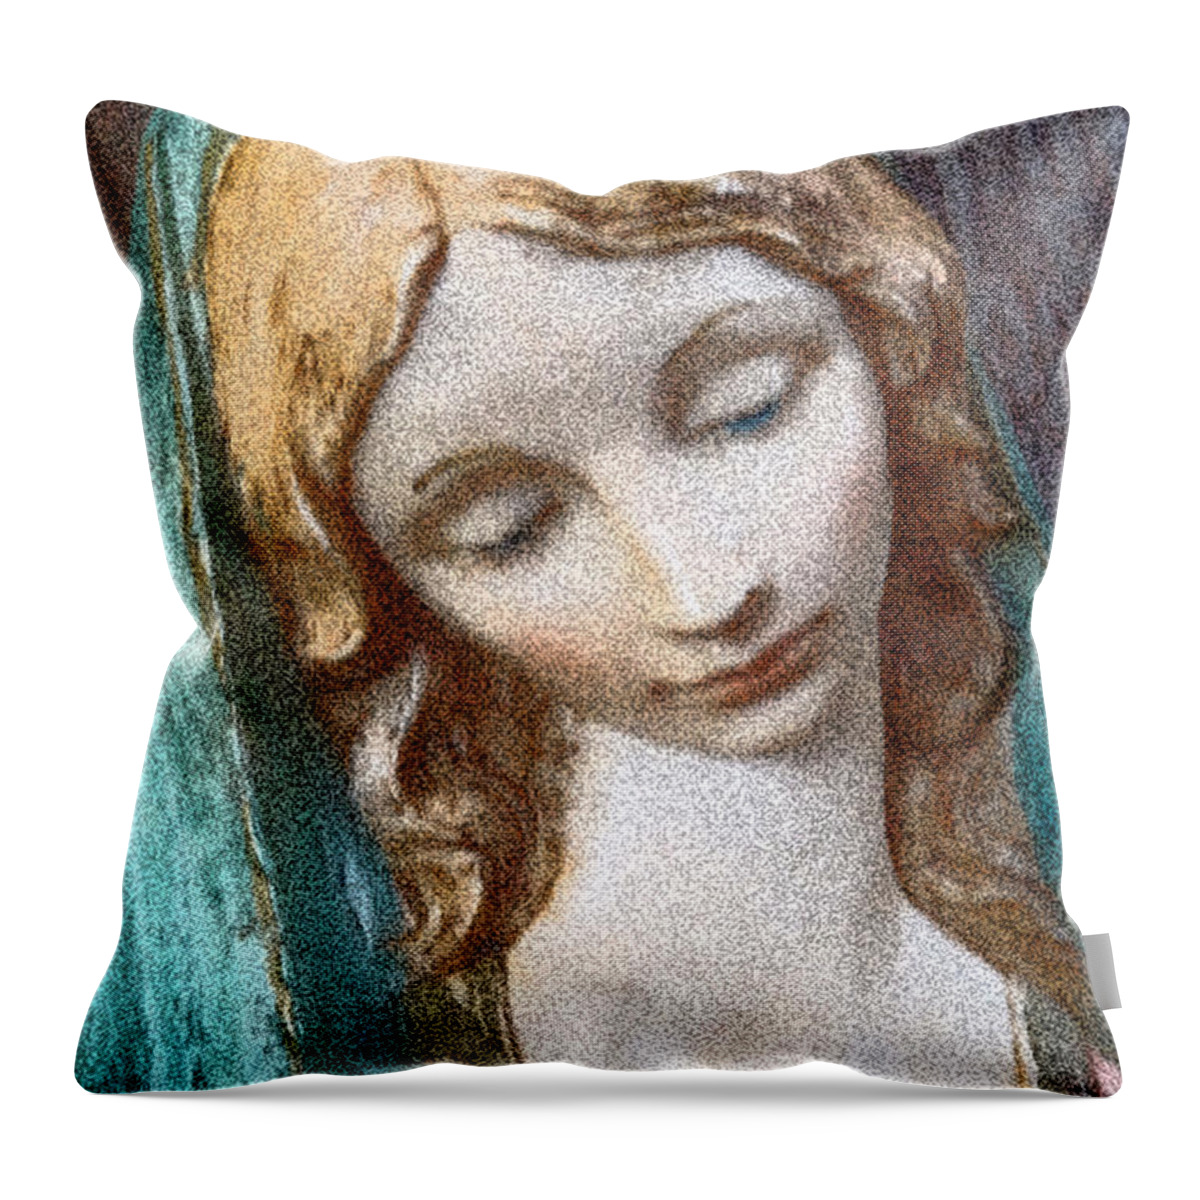 Portrait Throw Pillow featuring the photograph Pensive Madonna 2 by Lyric Lucas